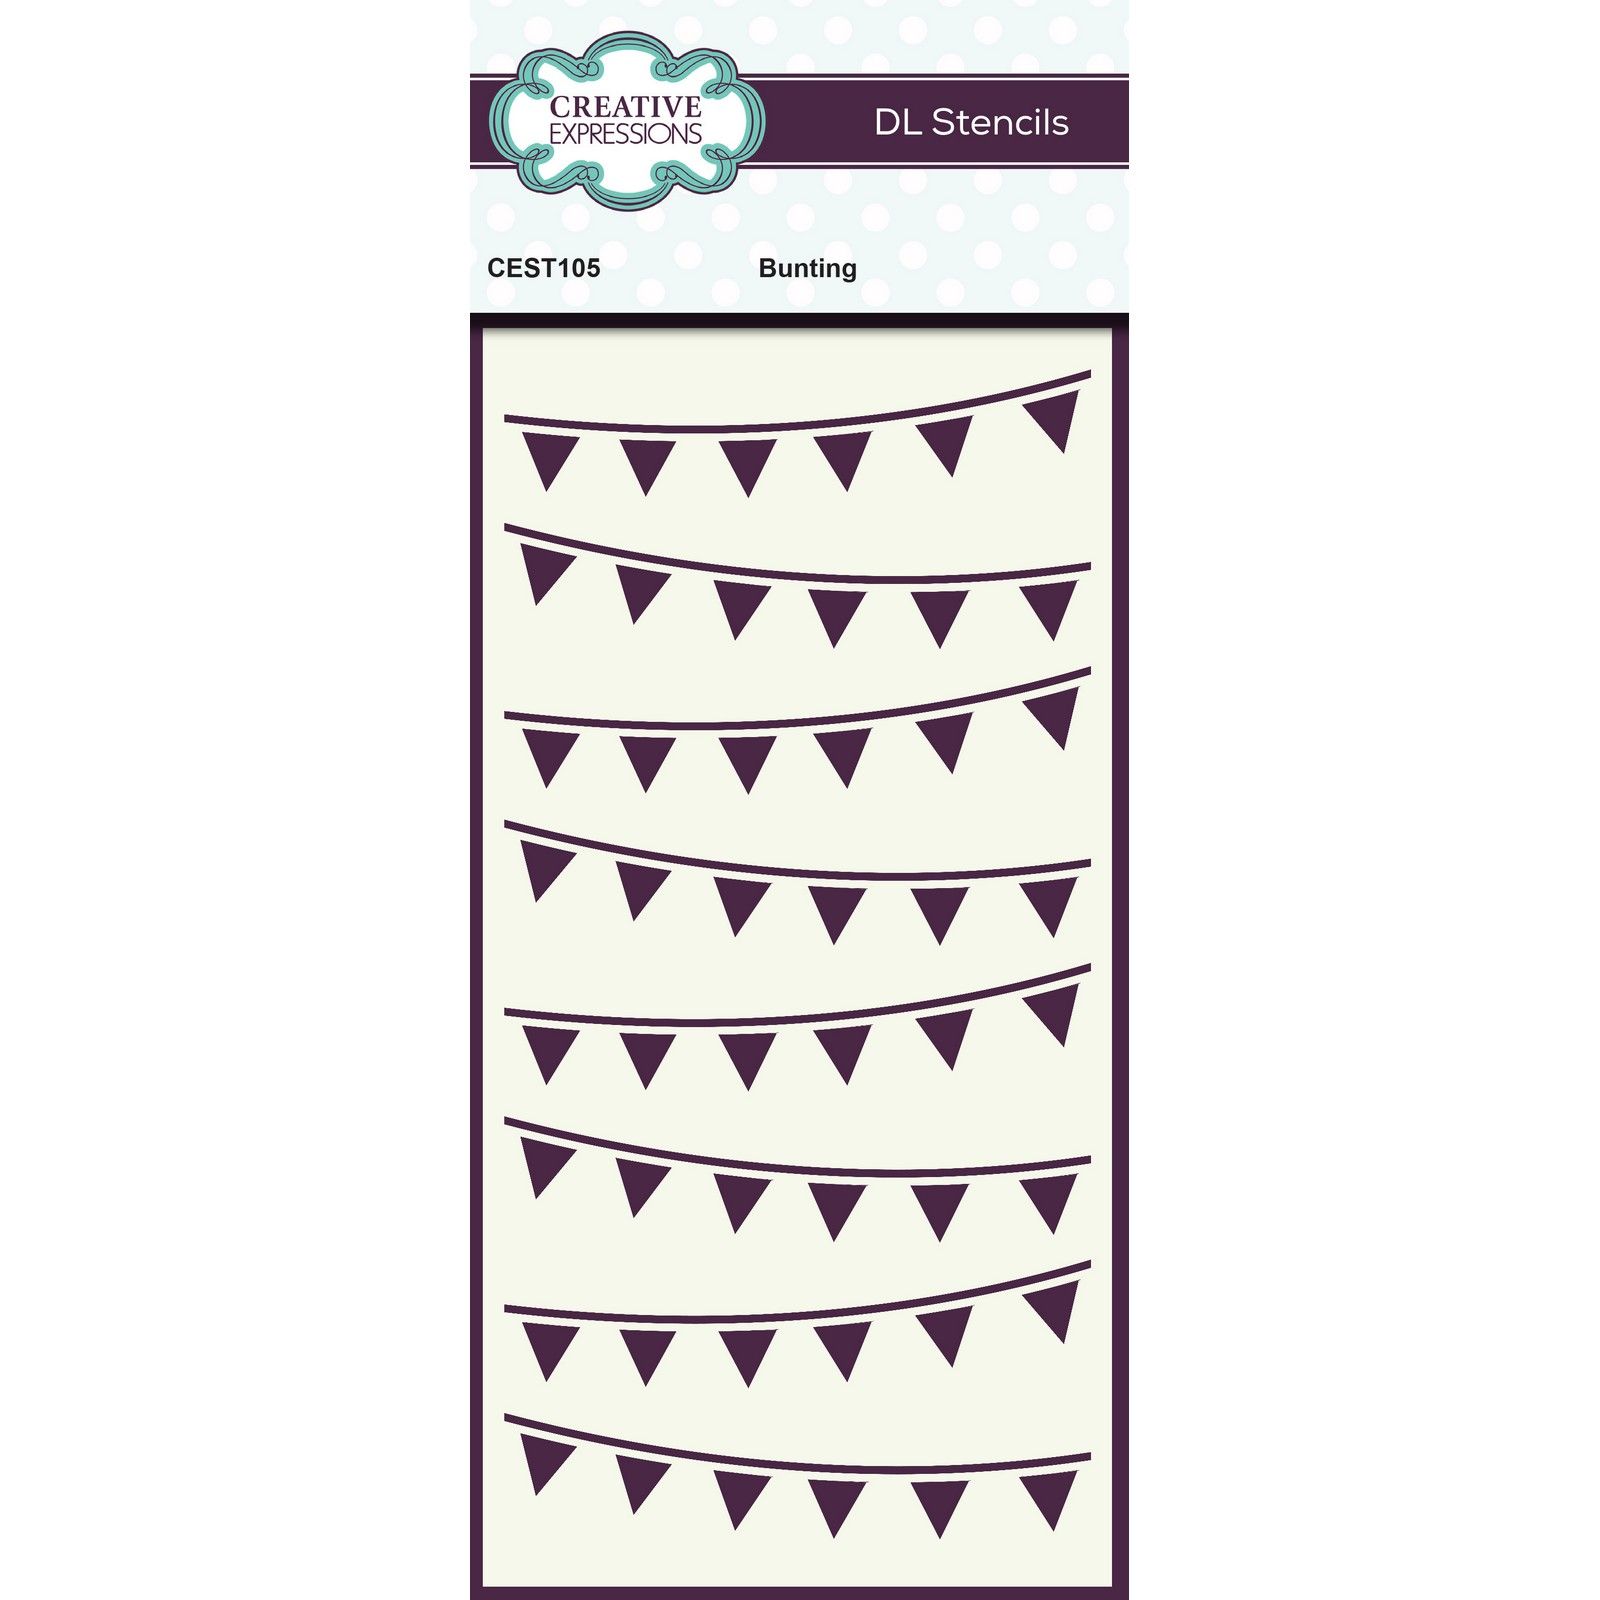 Creative Expressions • DL Stencil Bunting